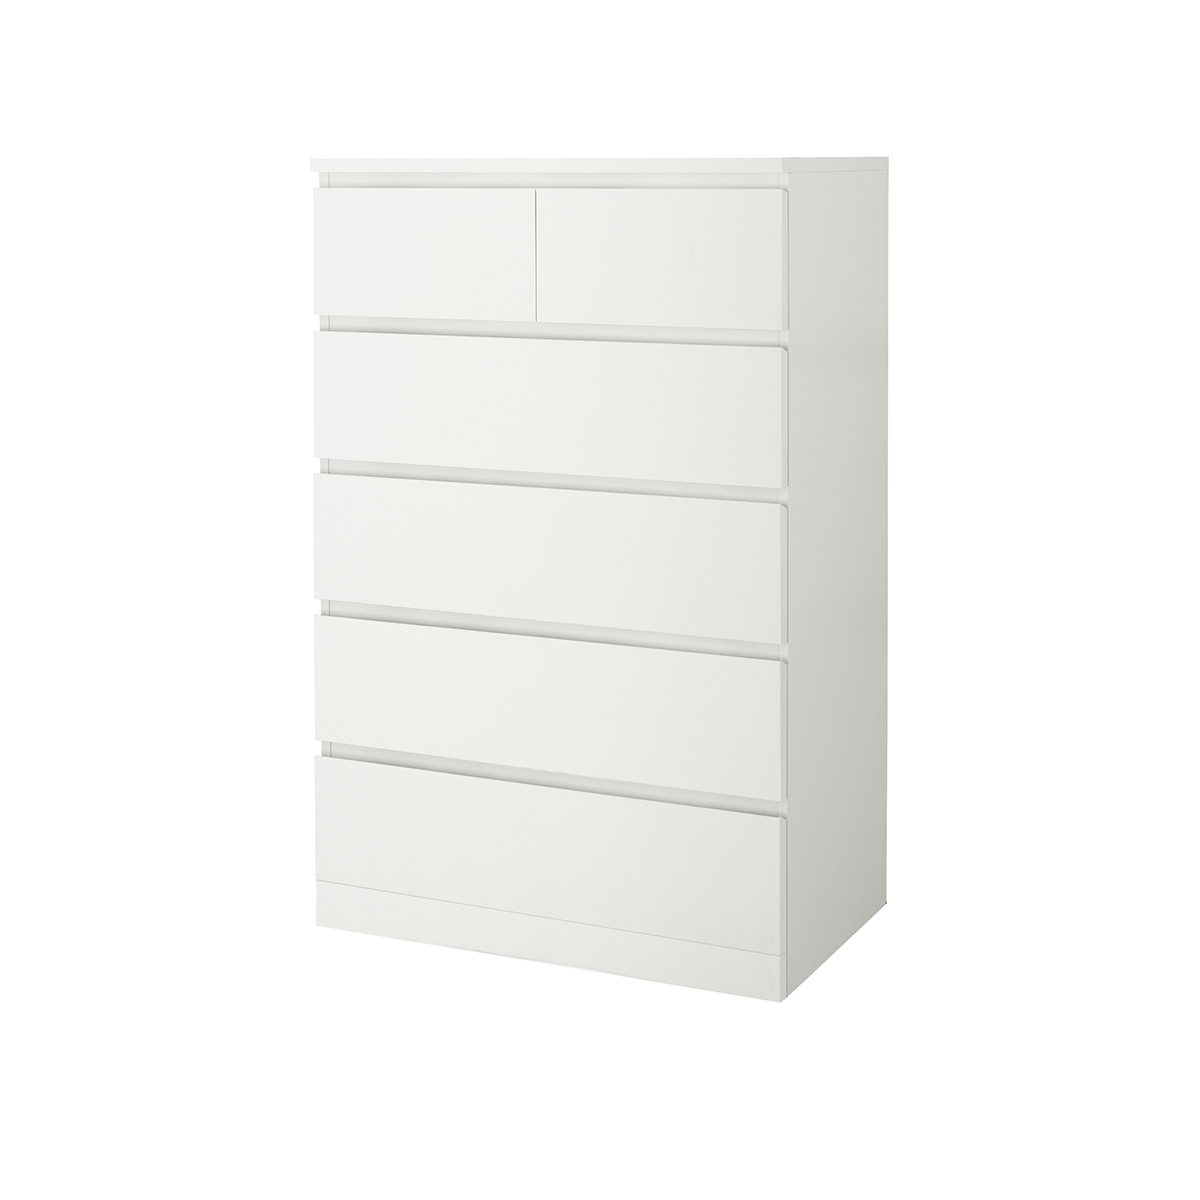 MALM Chest of 6 Drawers, 80x123 cm